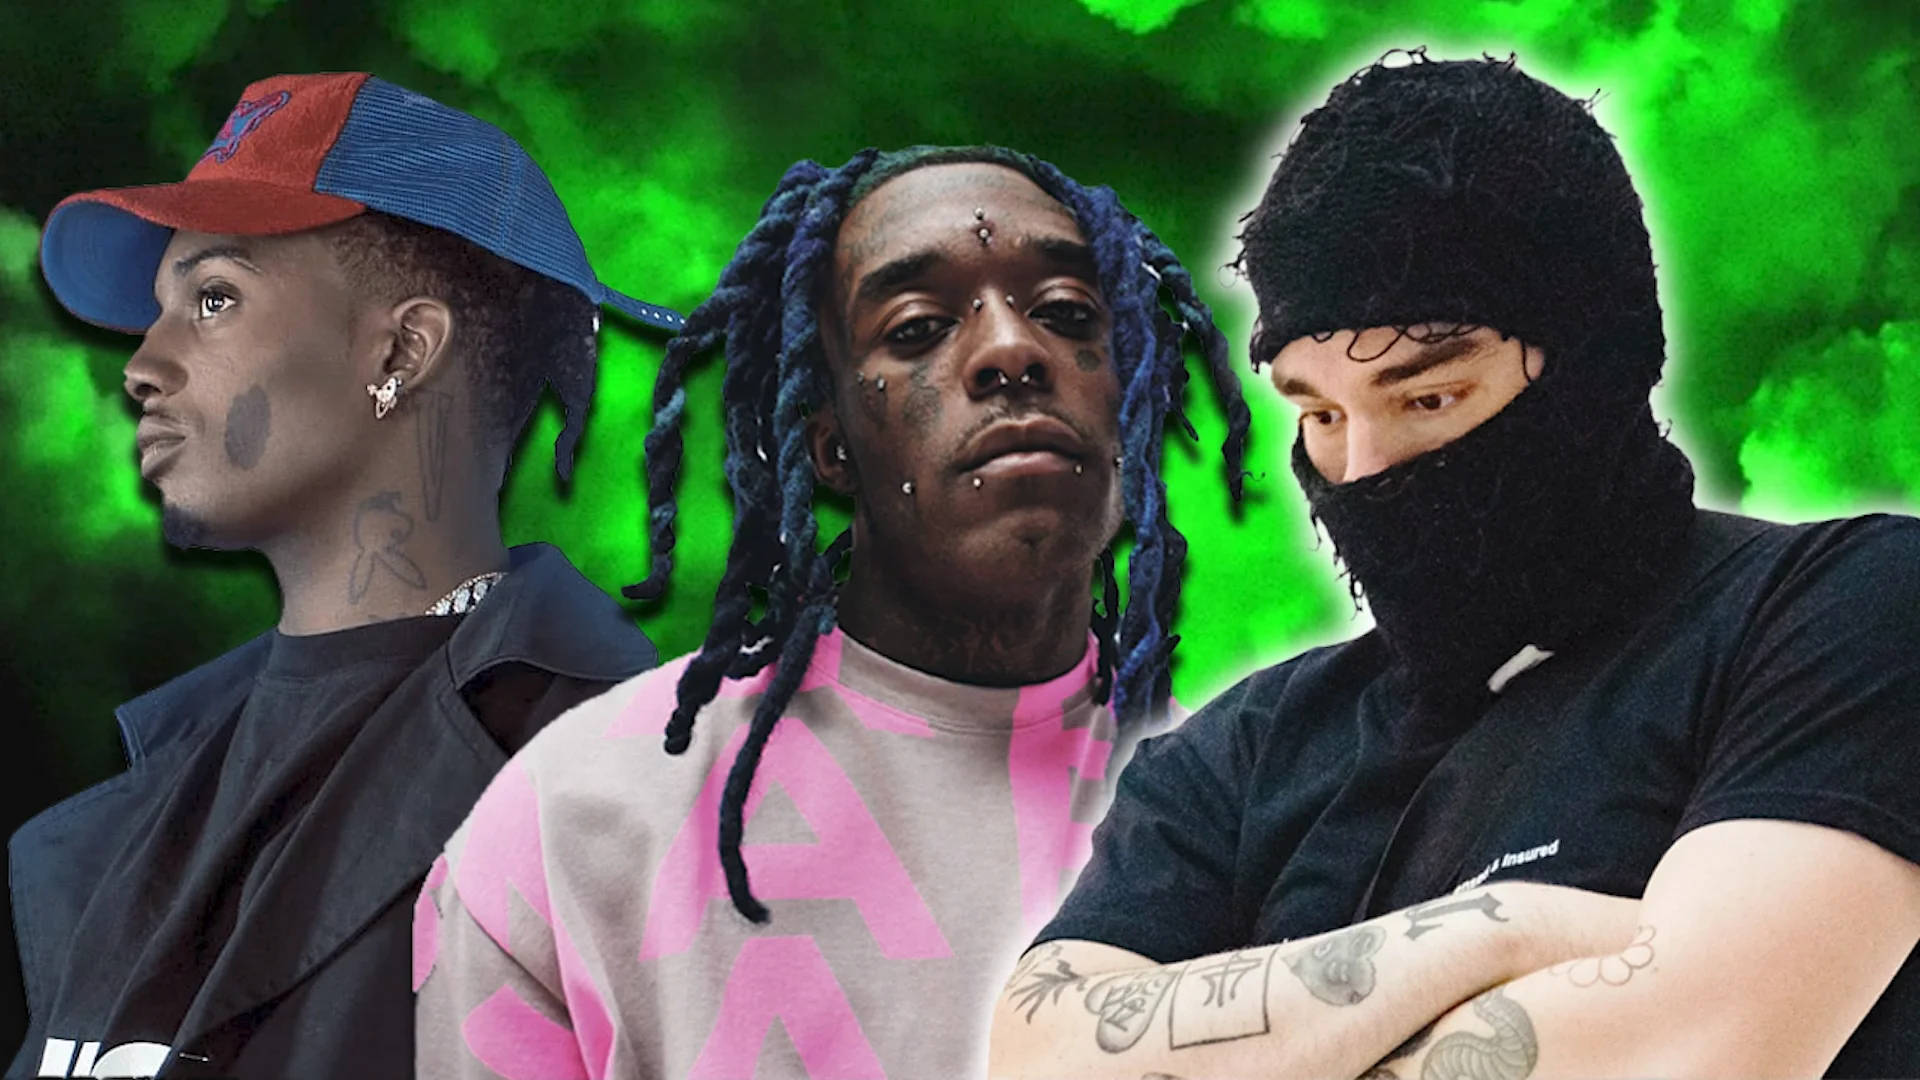 Yeat With Carti And Lil Uzi Vert Wallpaper